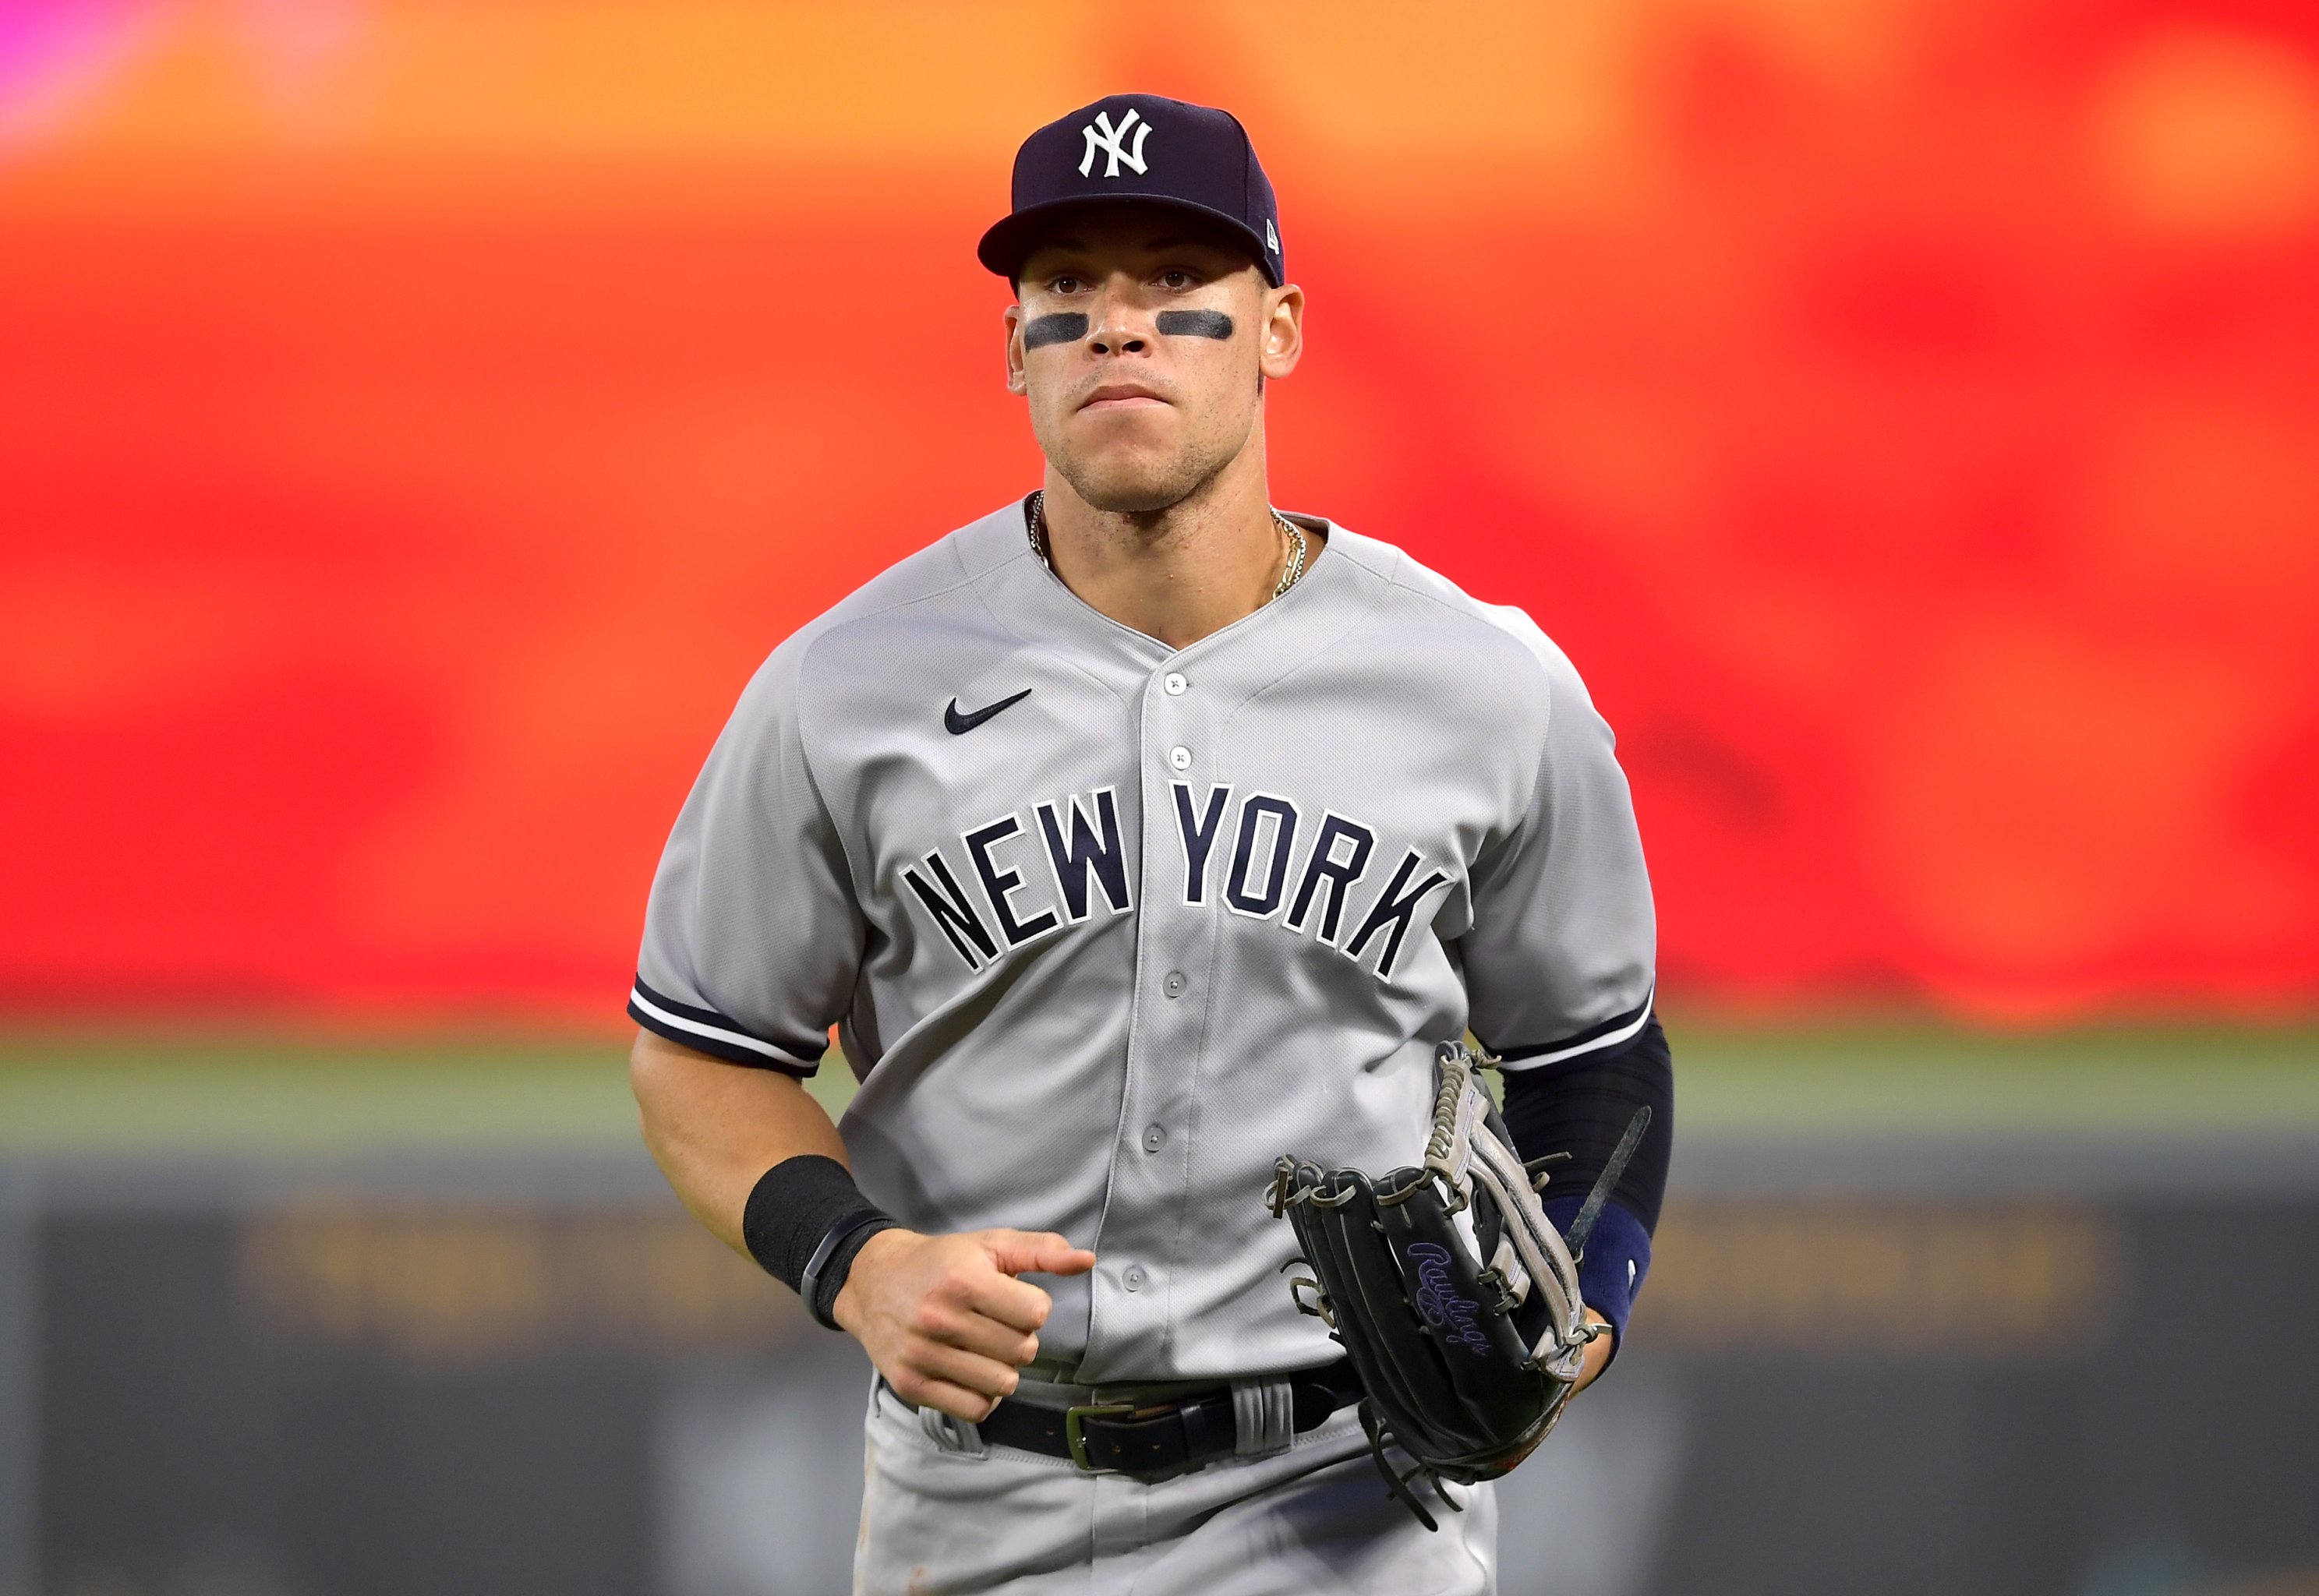 Nestor Cortes net worth 2022: What is Cortes' salary with the Yankees?